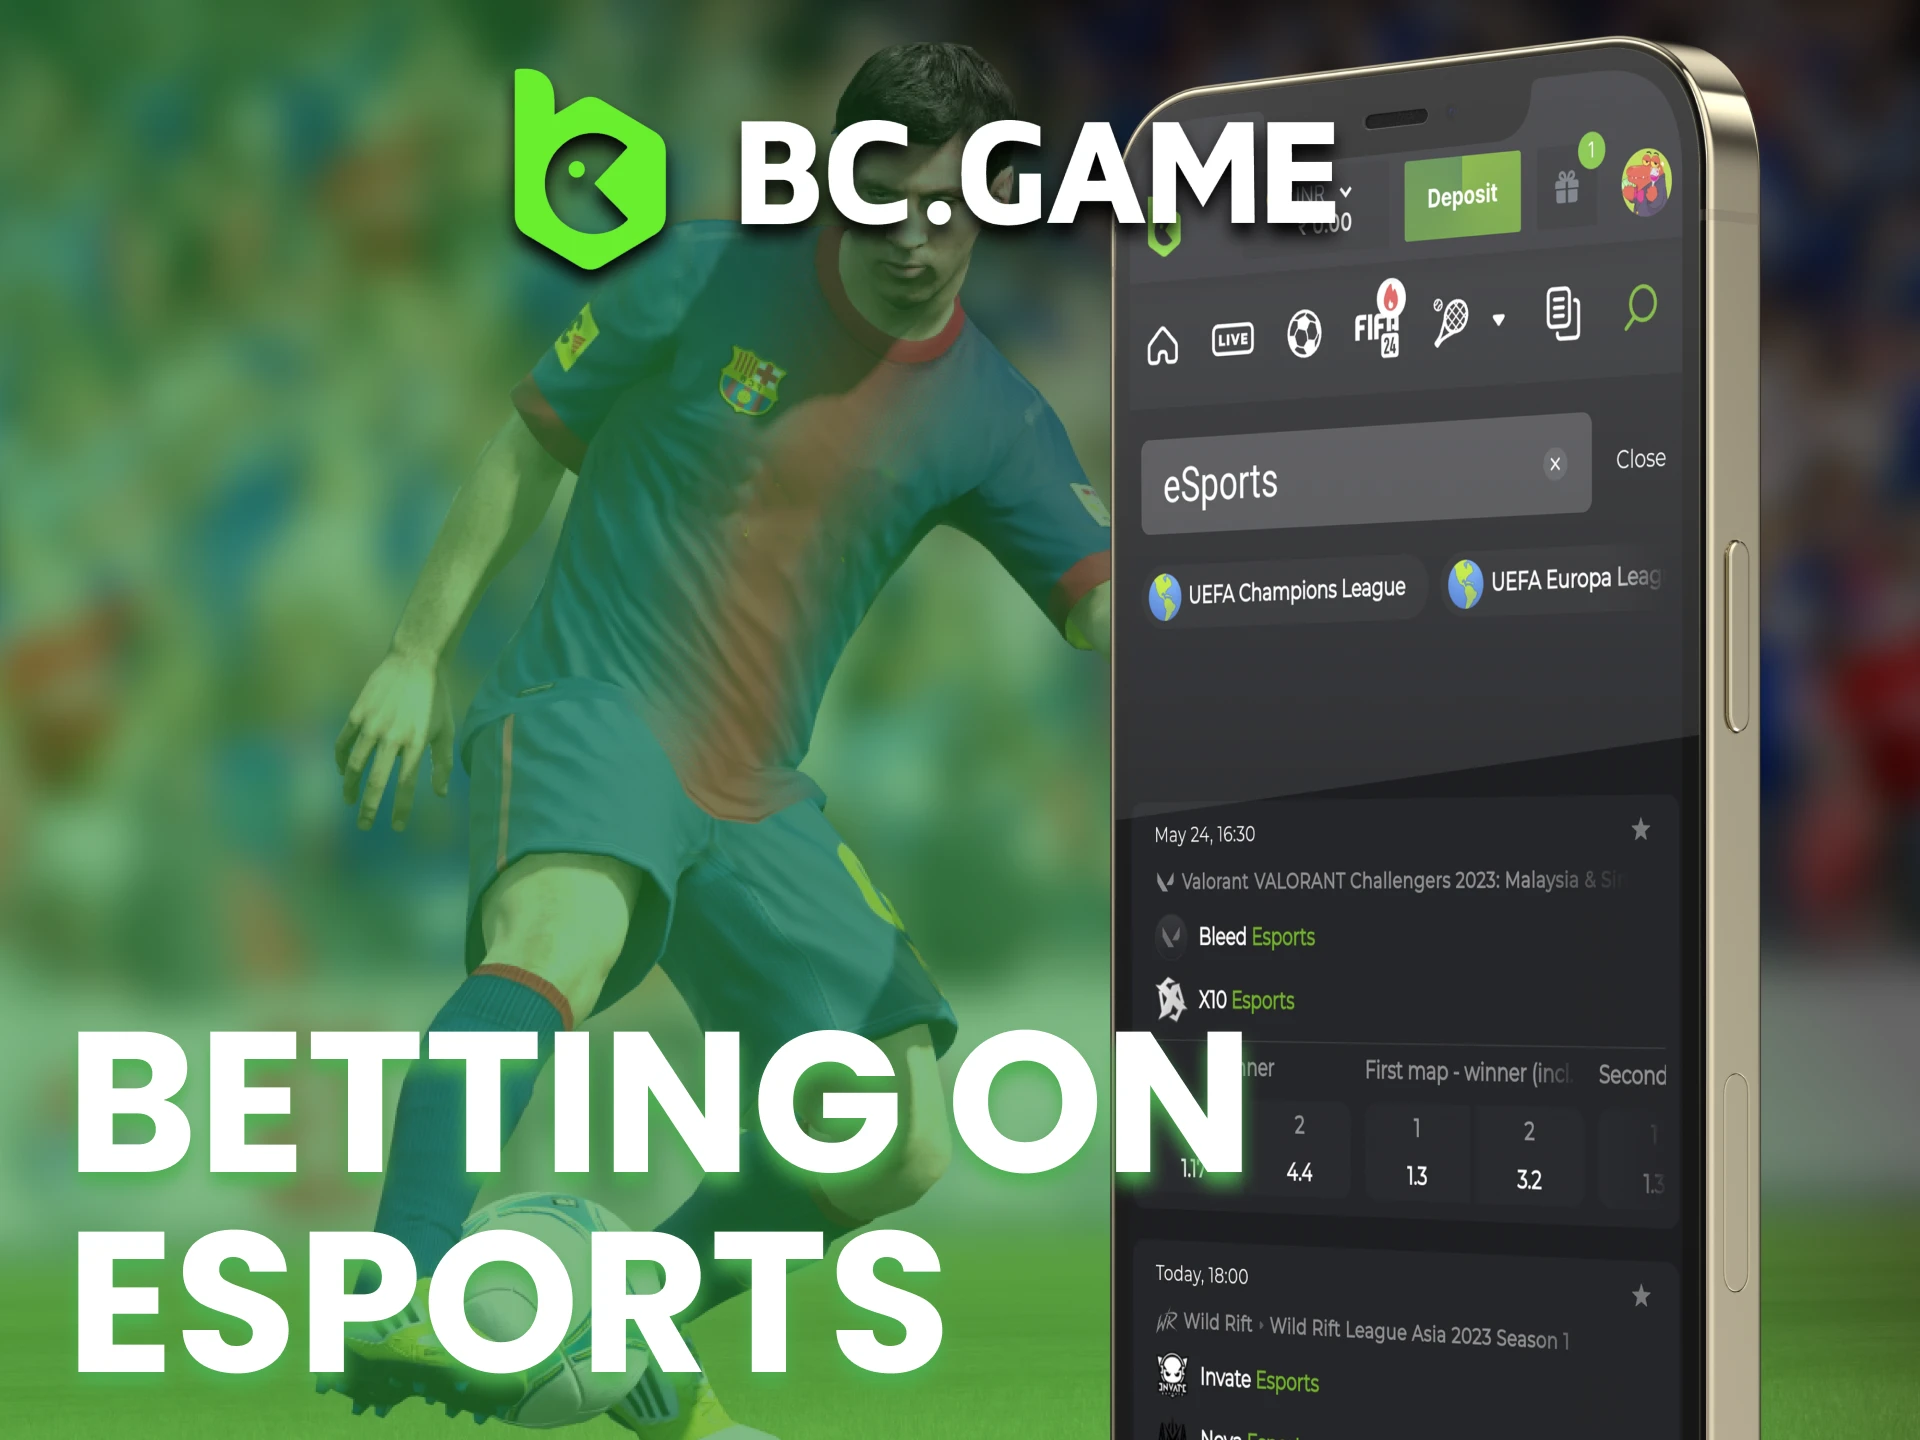 Bet on most intresting esports for watching in BC Game app.